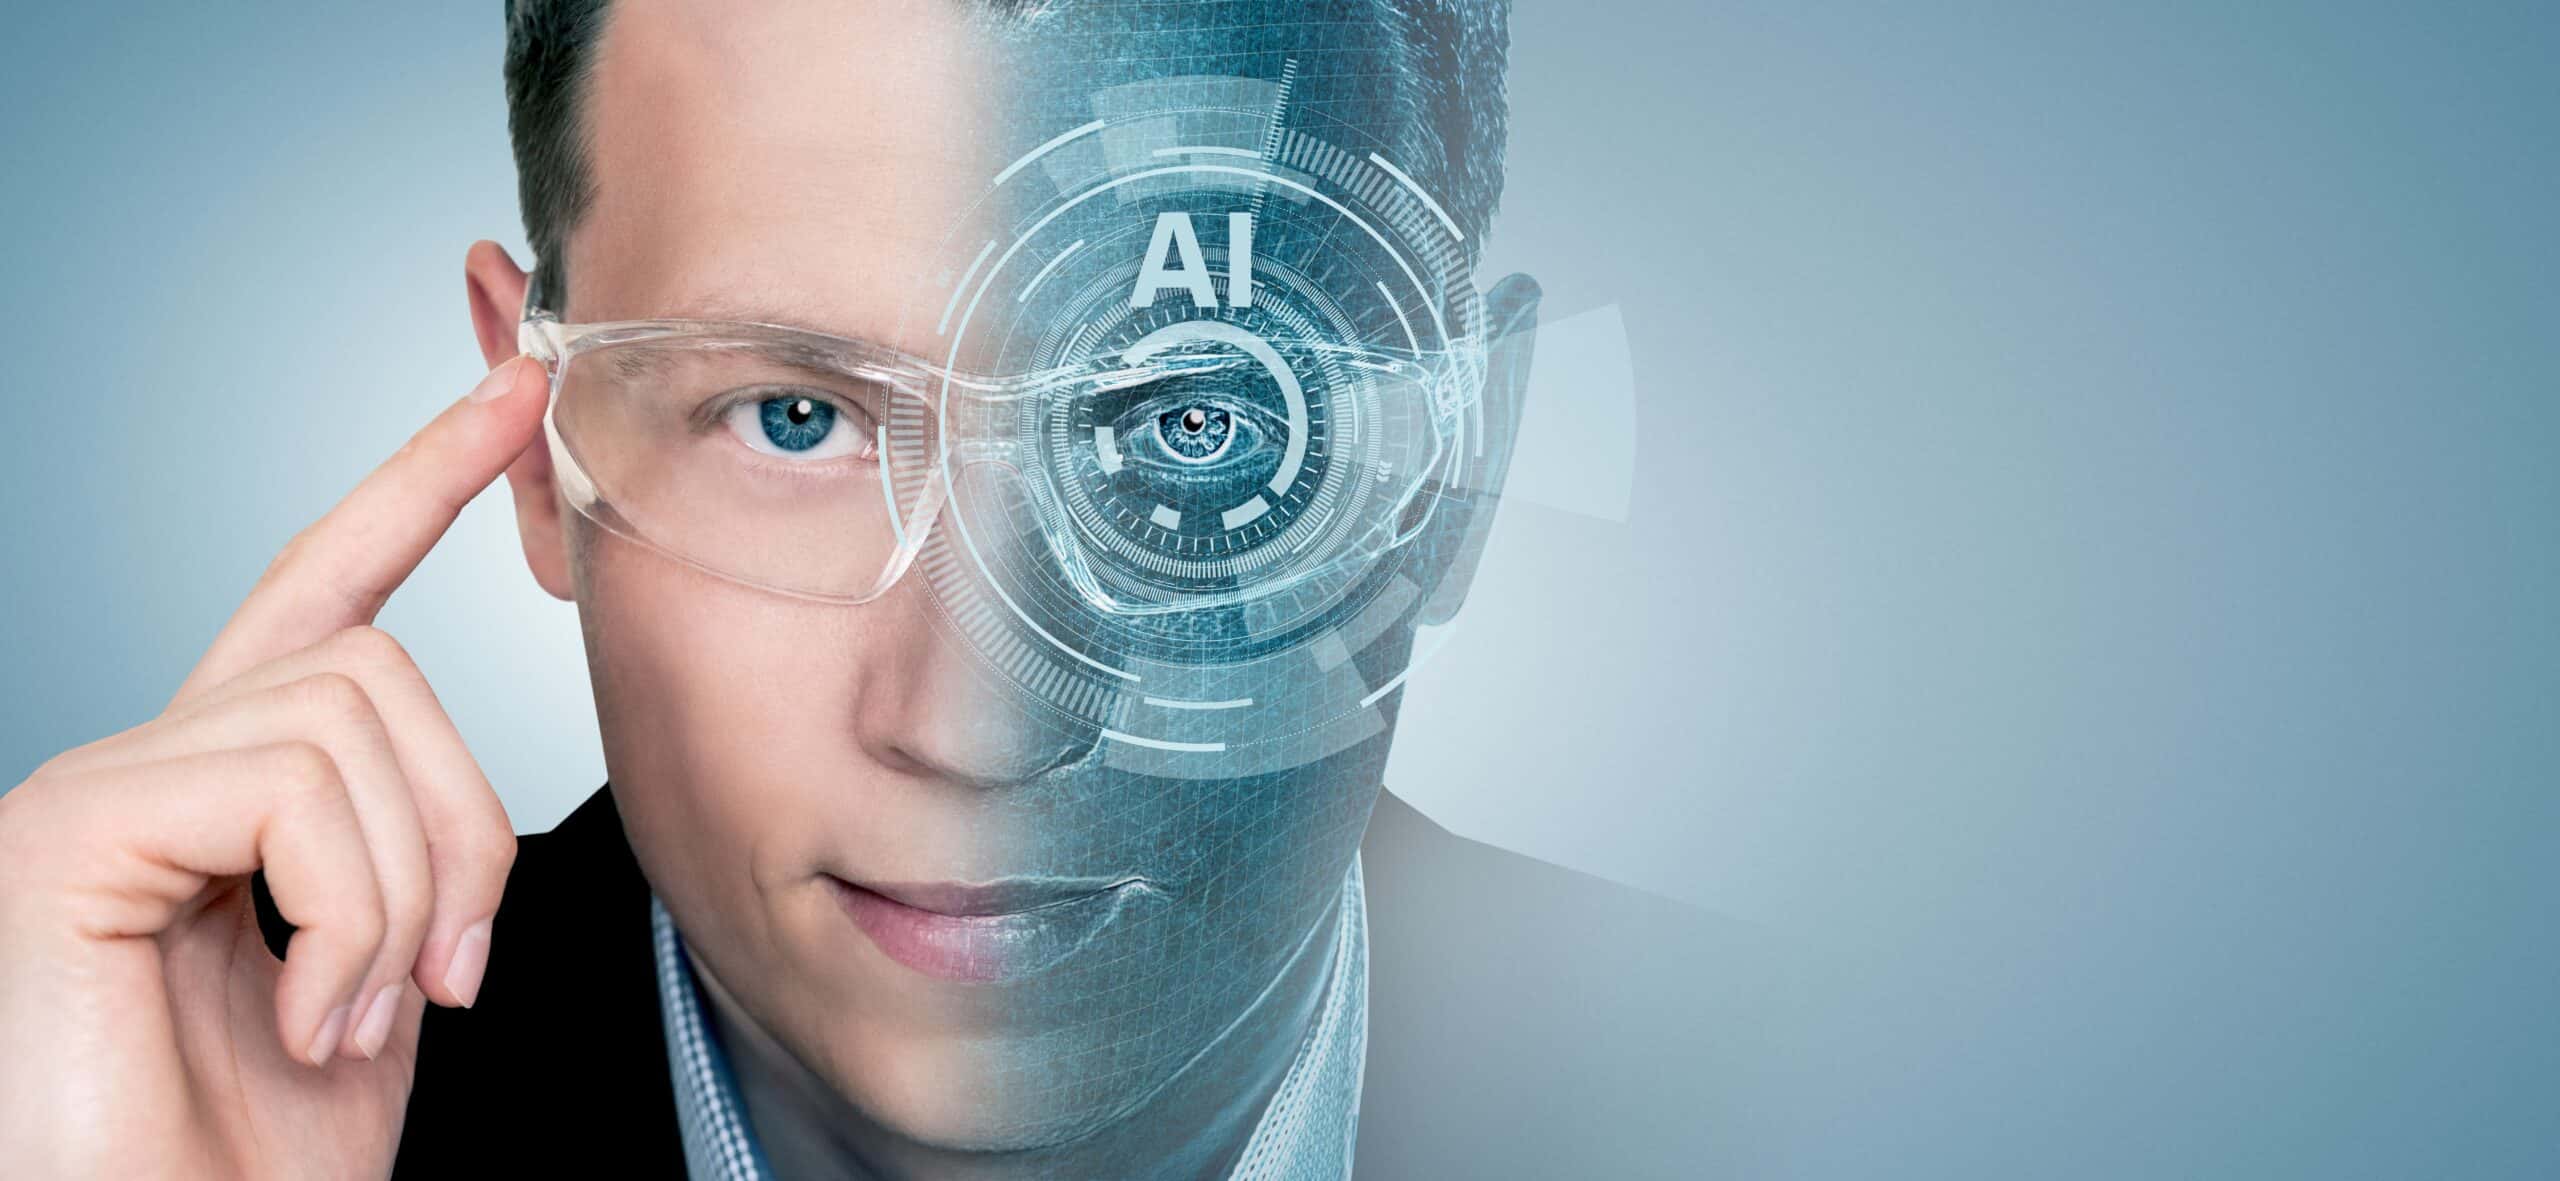 A man in a suit wearing futuristic glasses projecting an infographic about AI looks straight into the camera